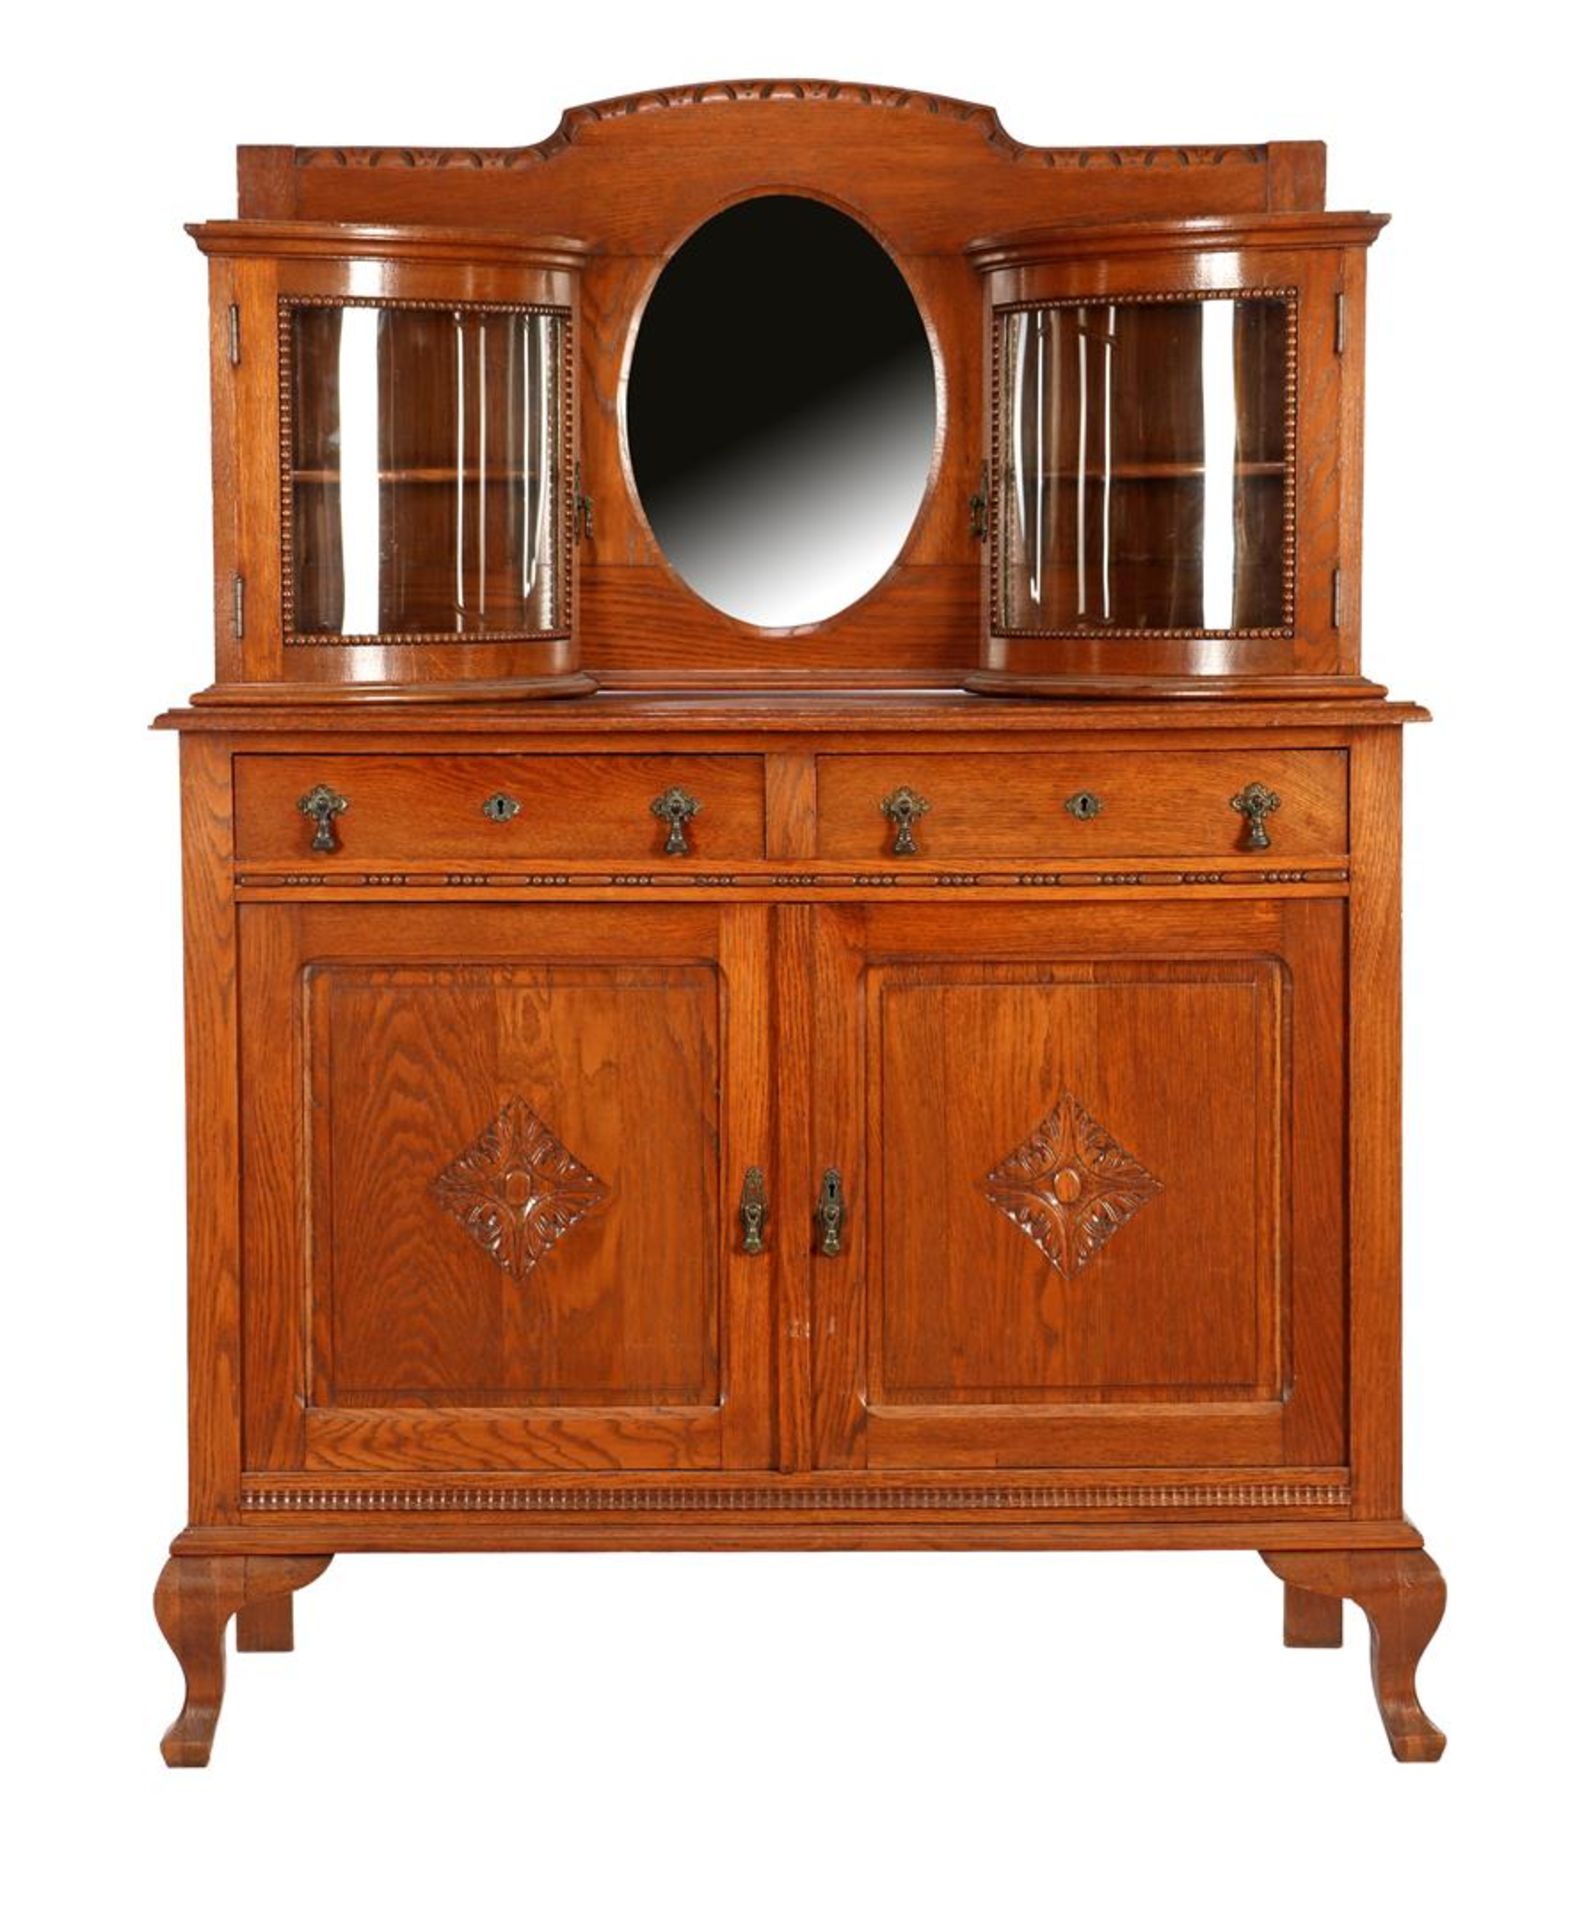 Oak 2-piece sideboard with curved windows in the upper cabinet with a mirror in between